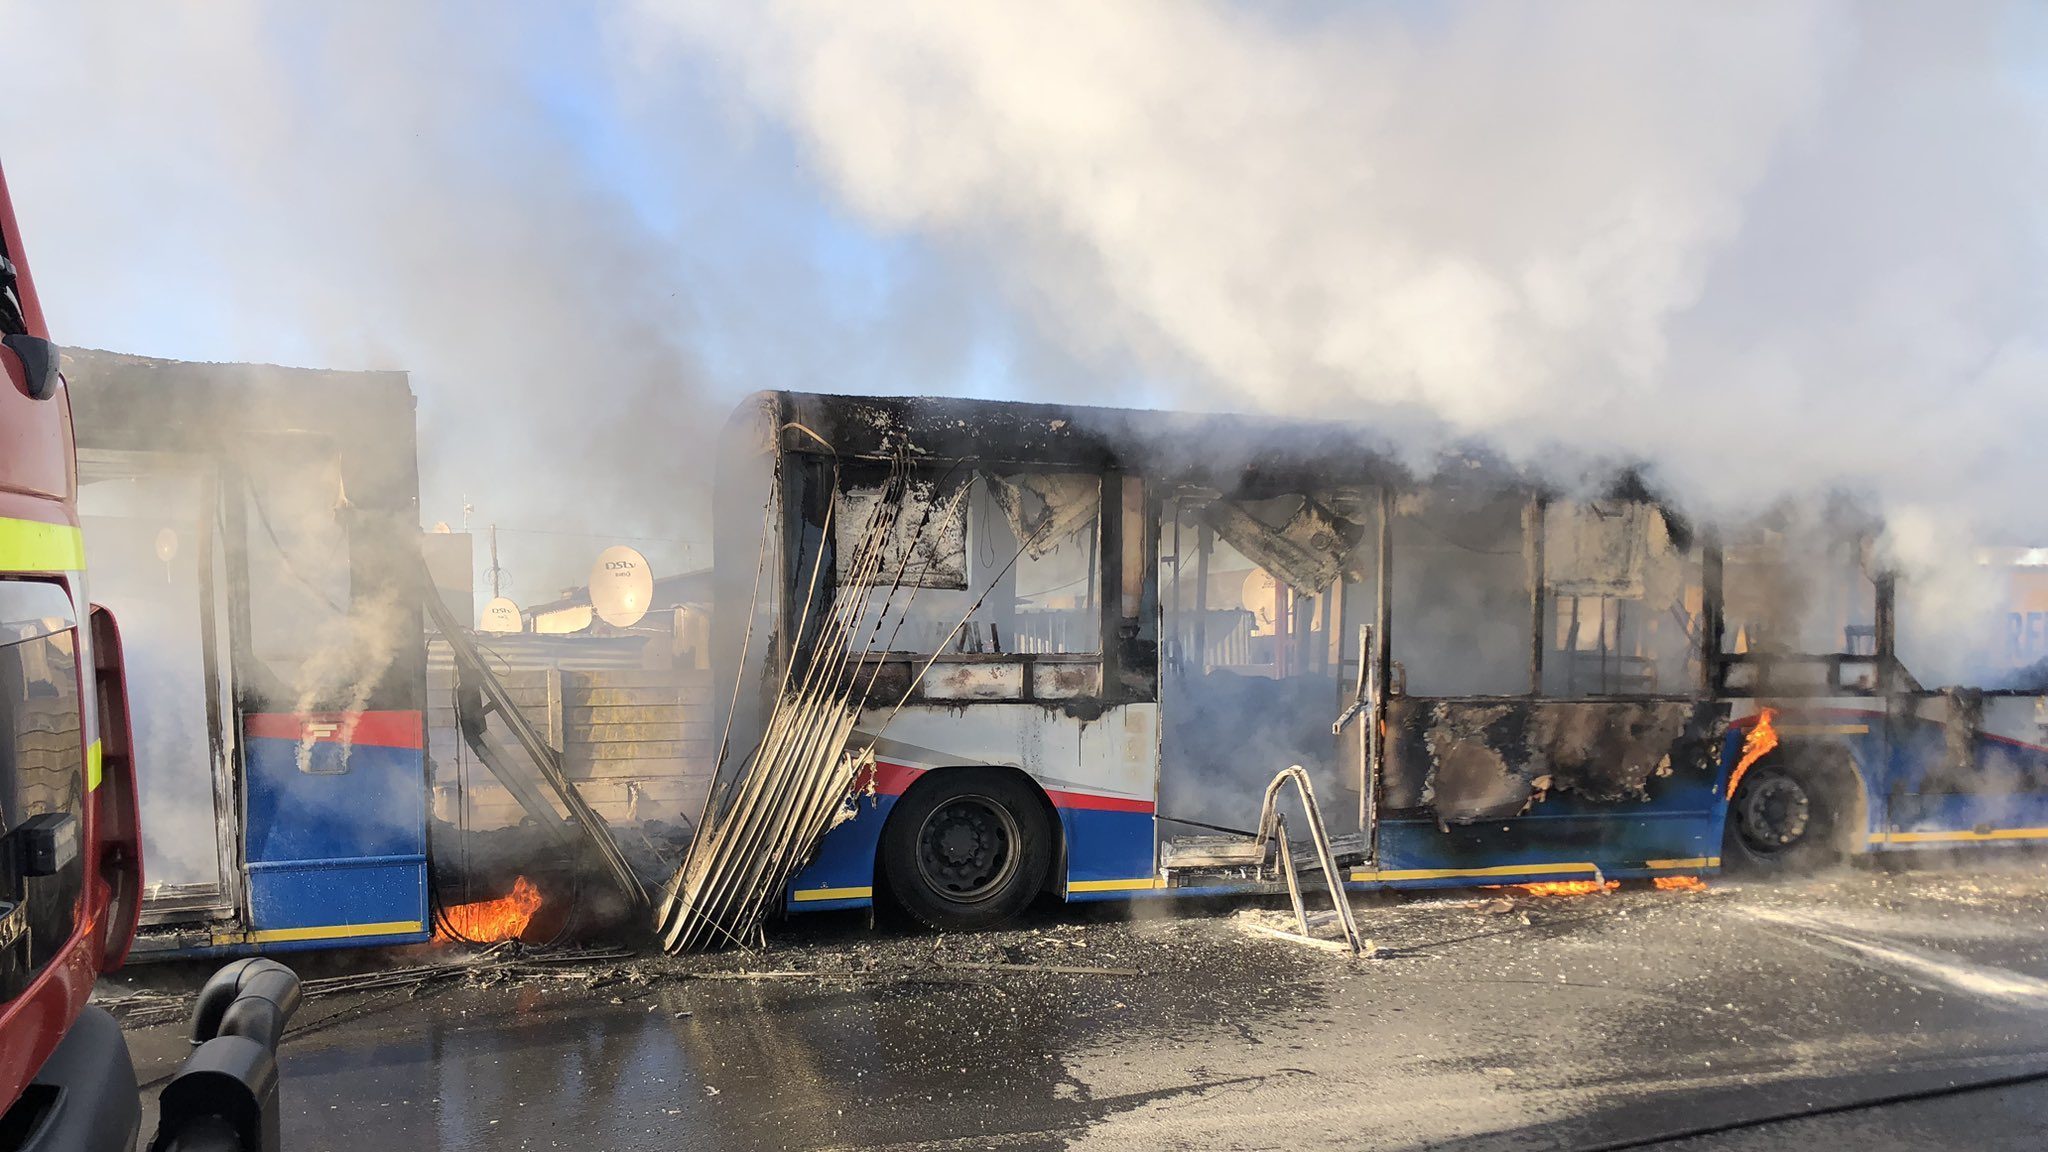 Taxi Strike: City condemns violent protest as SAPS confiscate petrol bombs